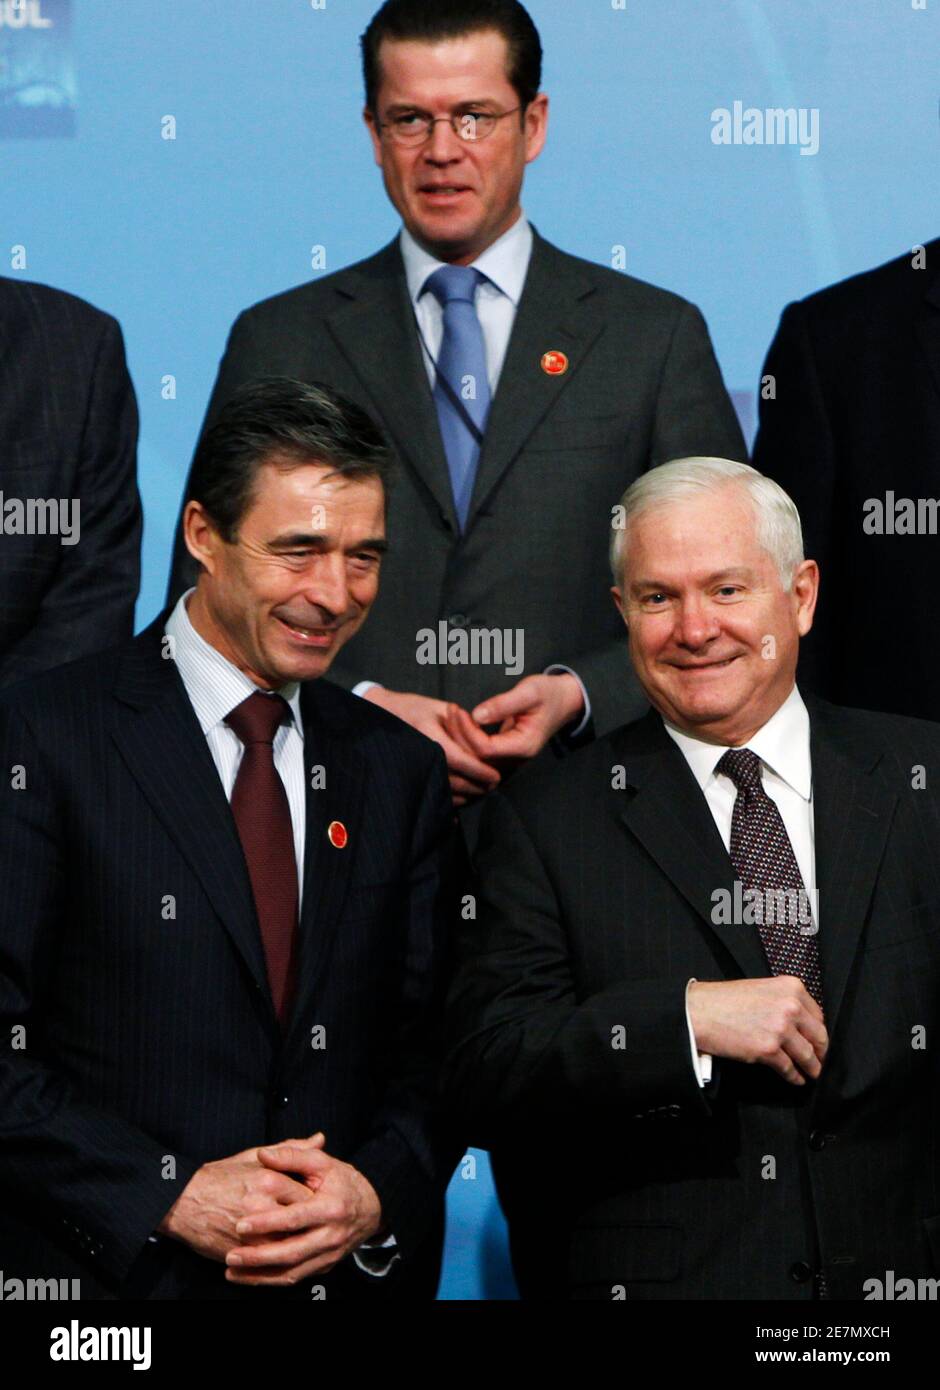 NATO Secretary-General Anders Fogh Rasmussen (L) poses with U.S. Defence Secretary Robert Gates (R) and Germany's Defence Minister Karl-Theodor zu Guttenberg (back C) for a group photo during the informal meeting of NATO Defence Ministers in Istanbul February 5, 2010.  REUTERS/Murad Sezer (TURKEY - Tags: POLITICS) Stock Photo